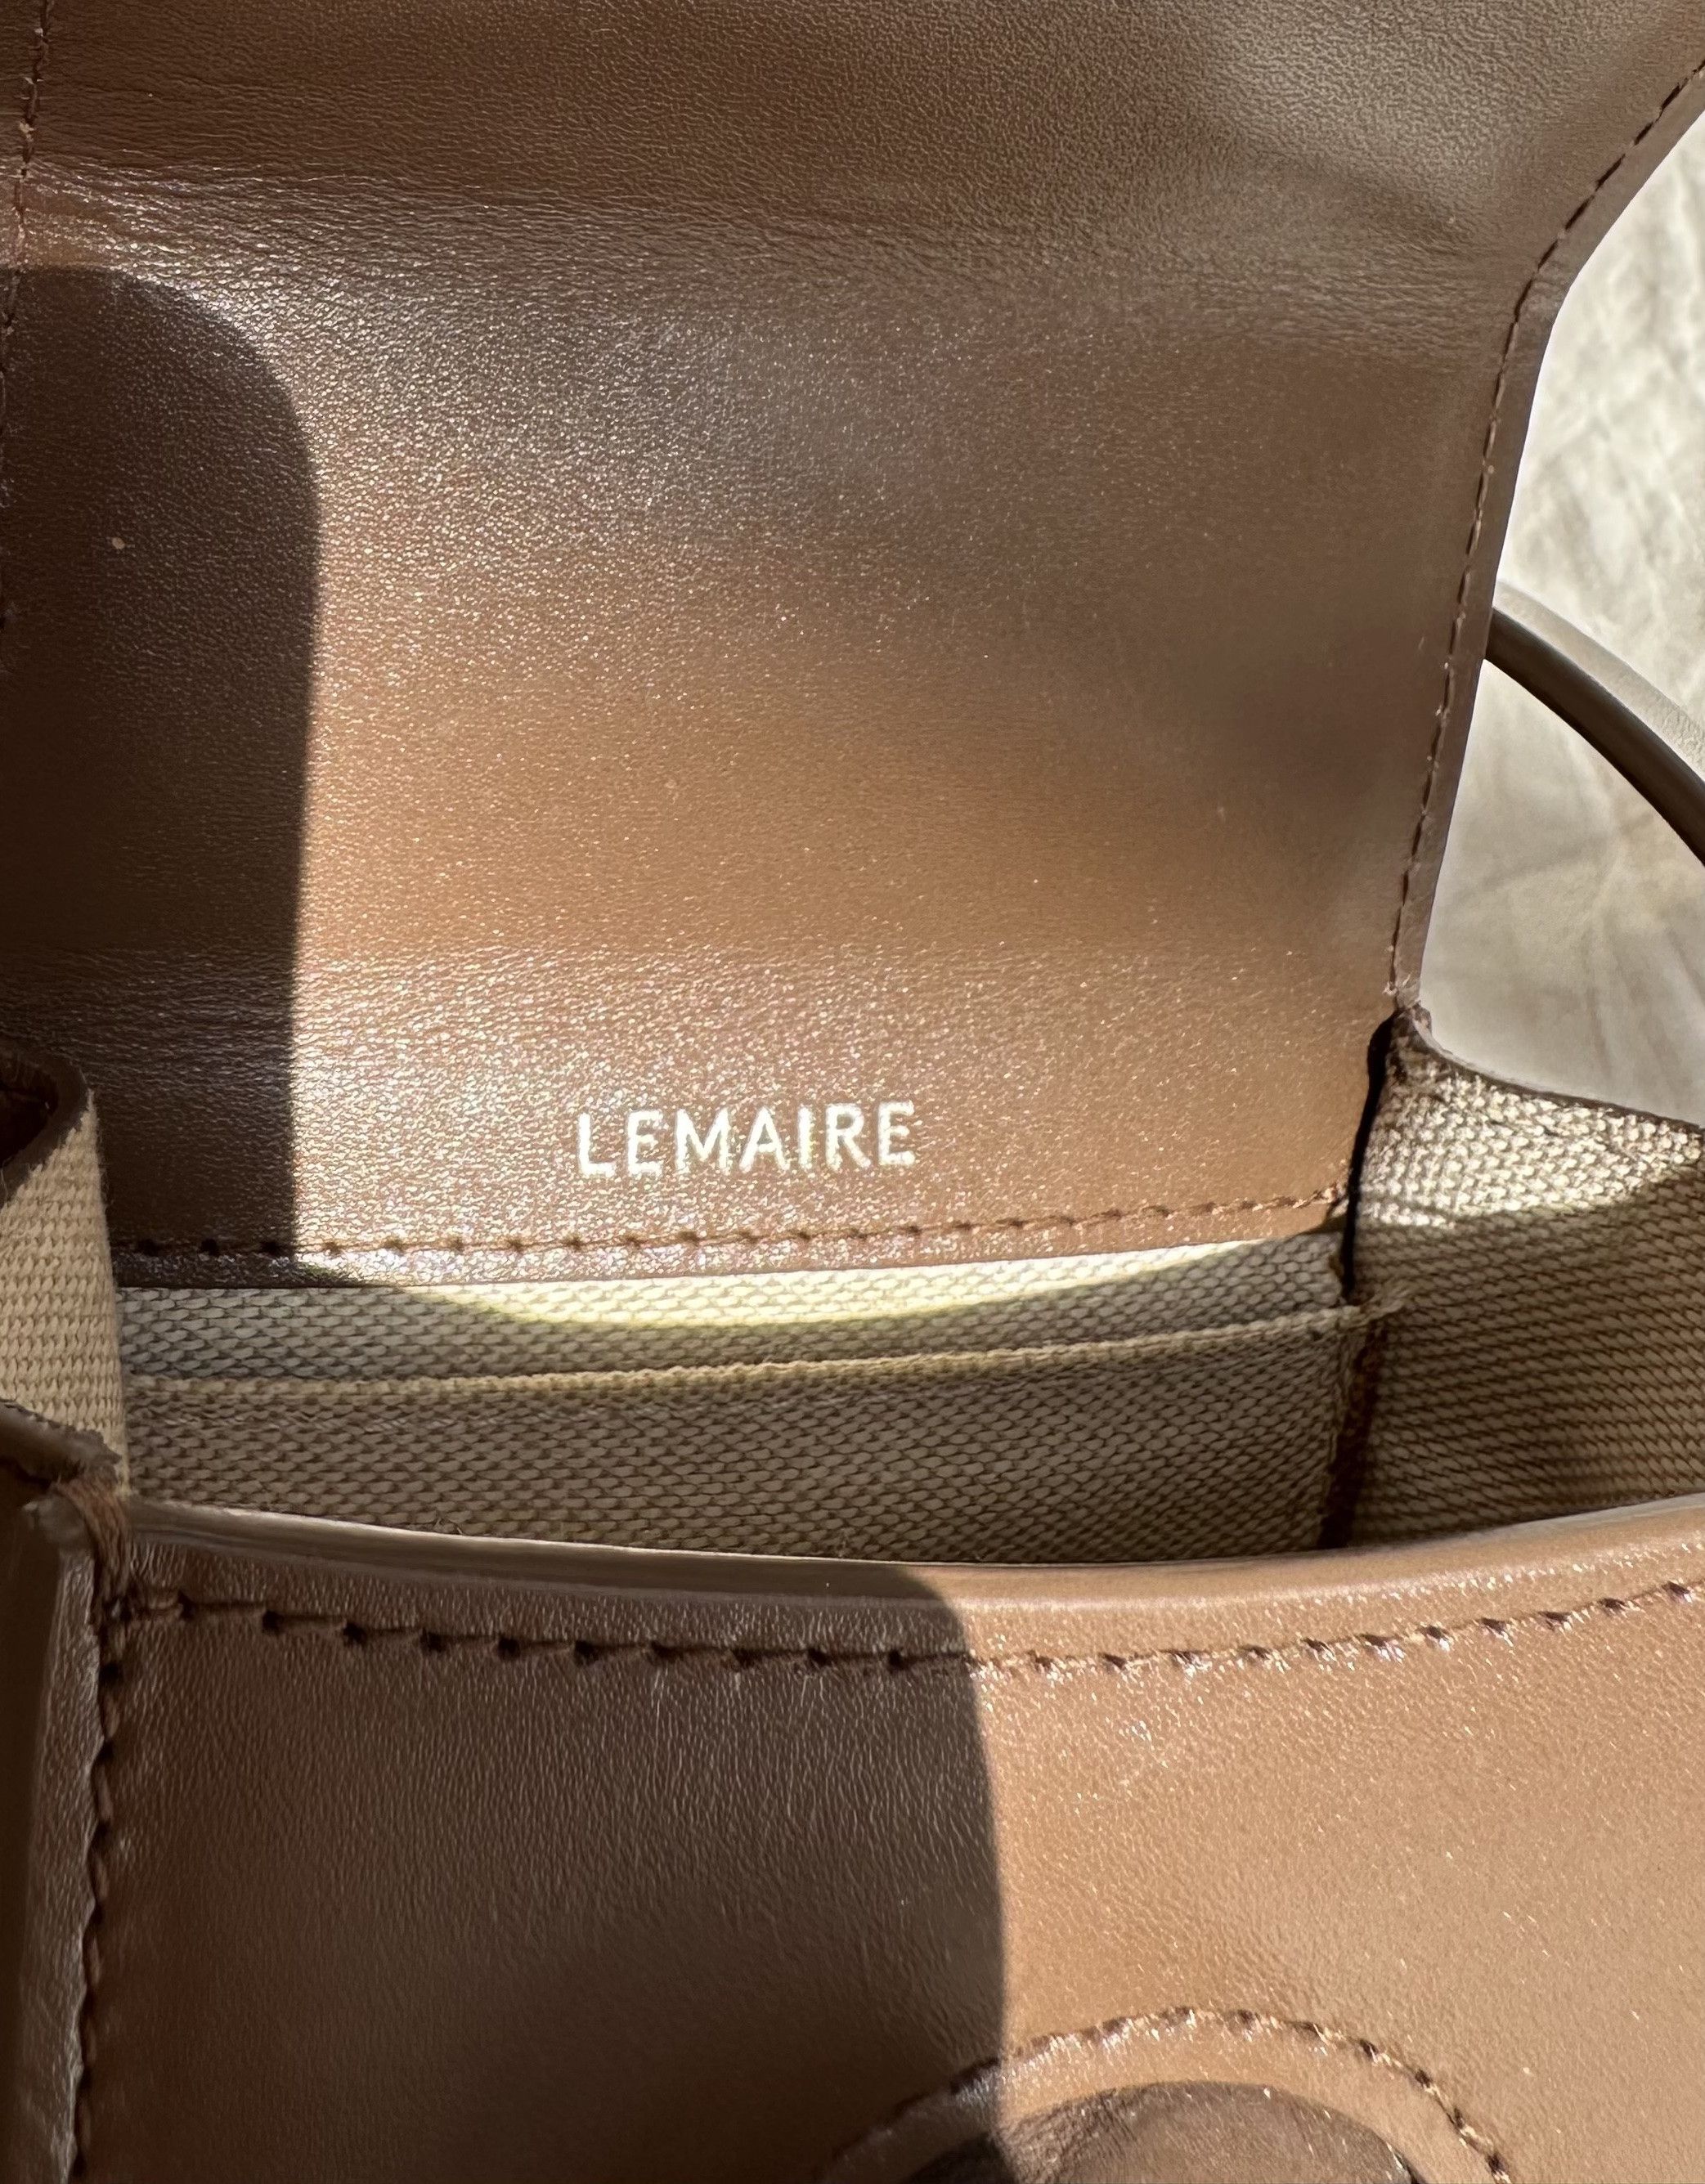 Lemaire Mini Camera Bag SSENSE Exclusive Taupe Size ONE SIZE - 3 Thumbnail